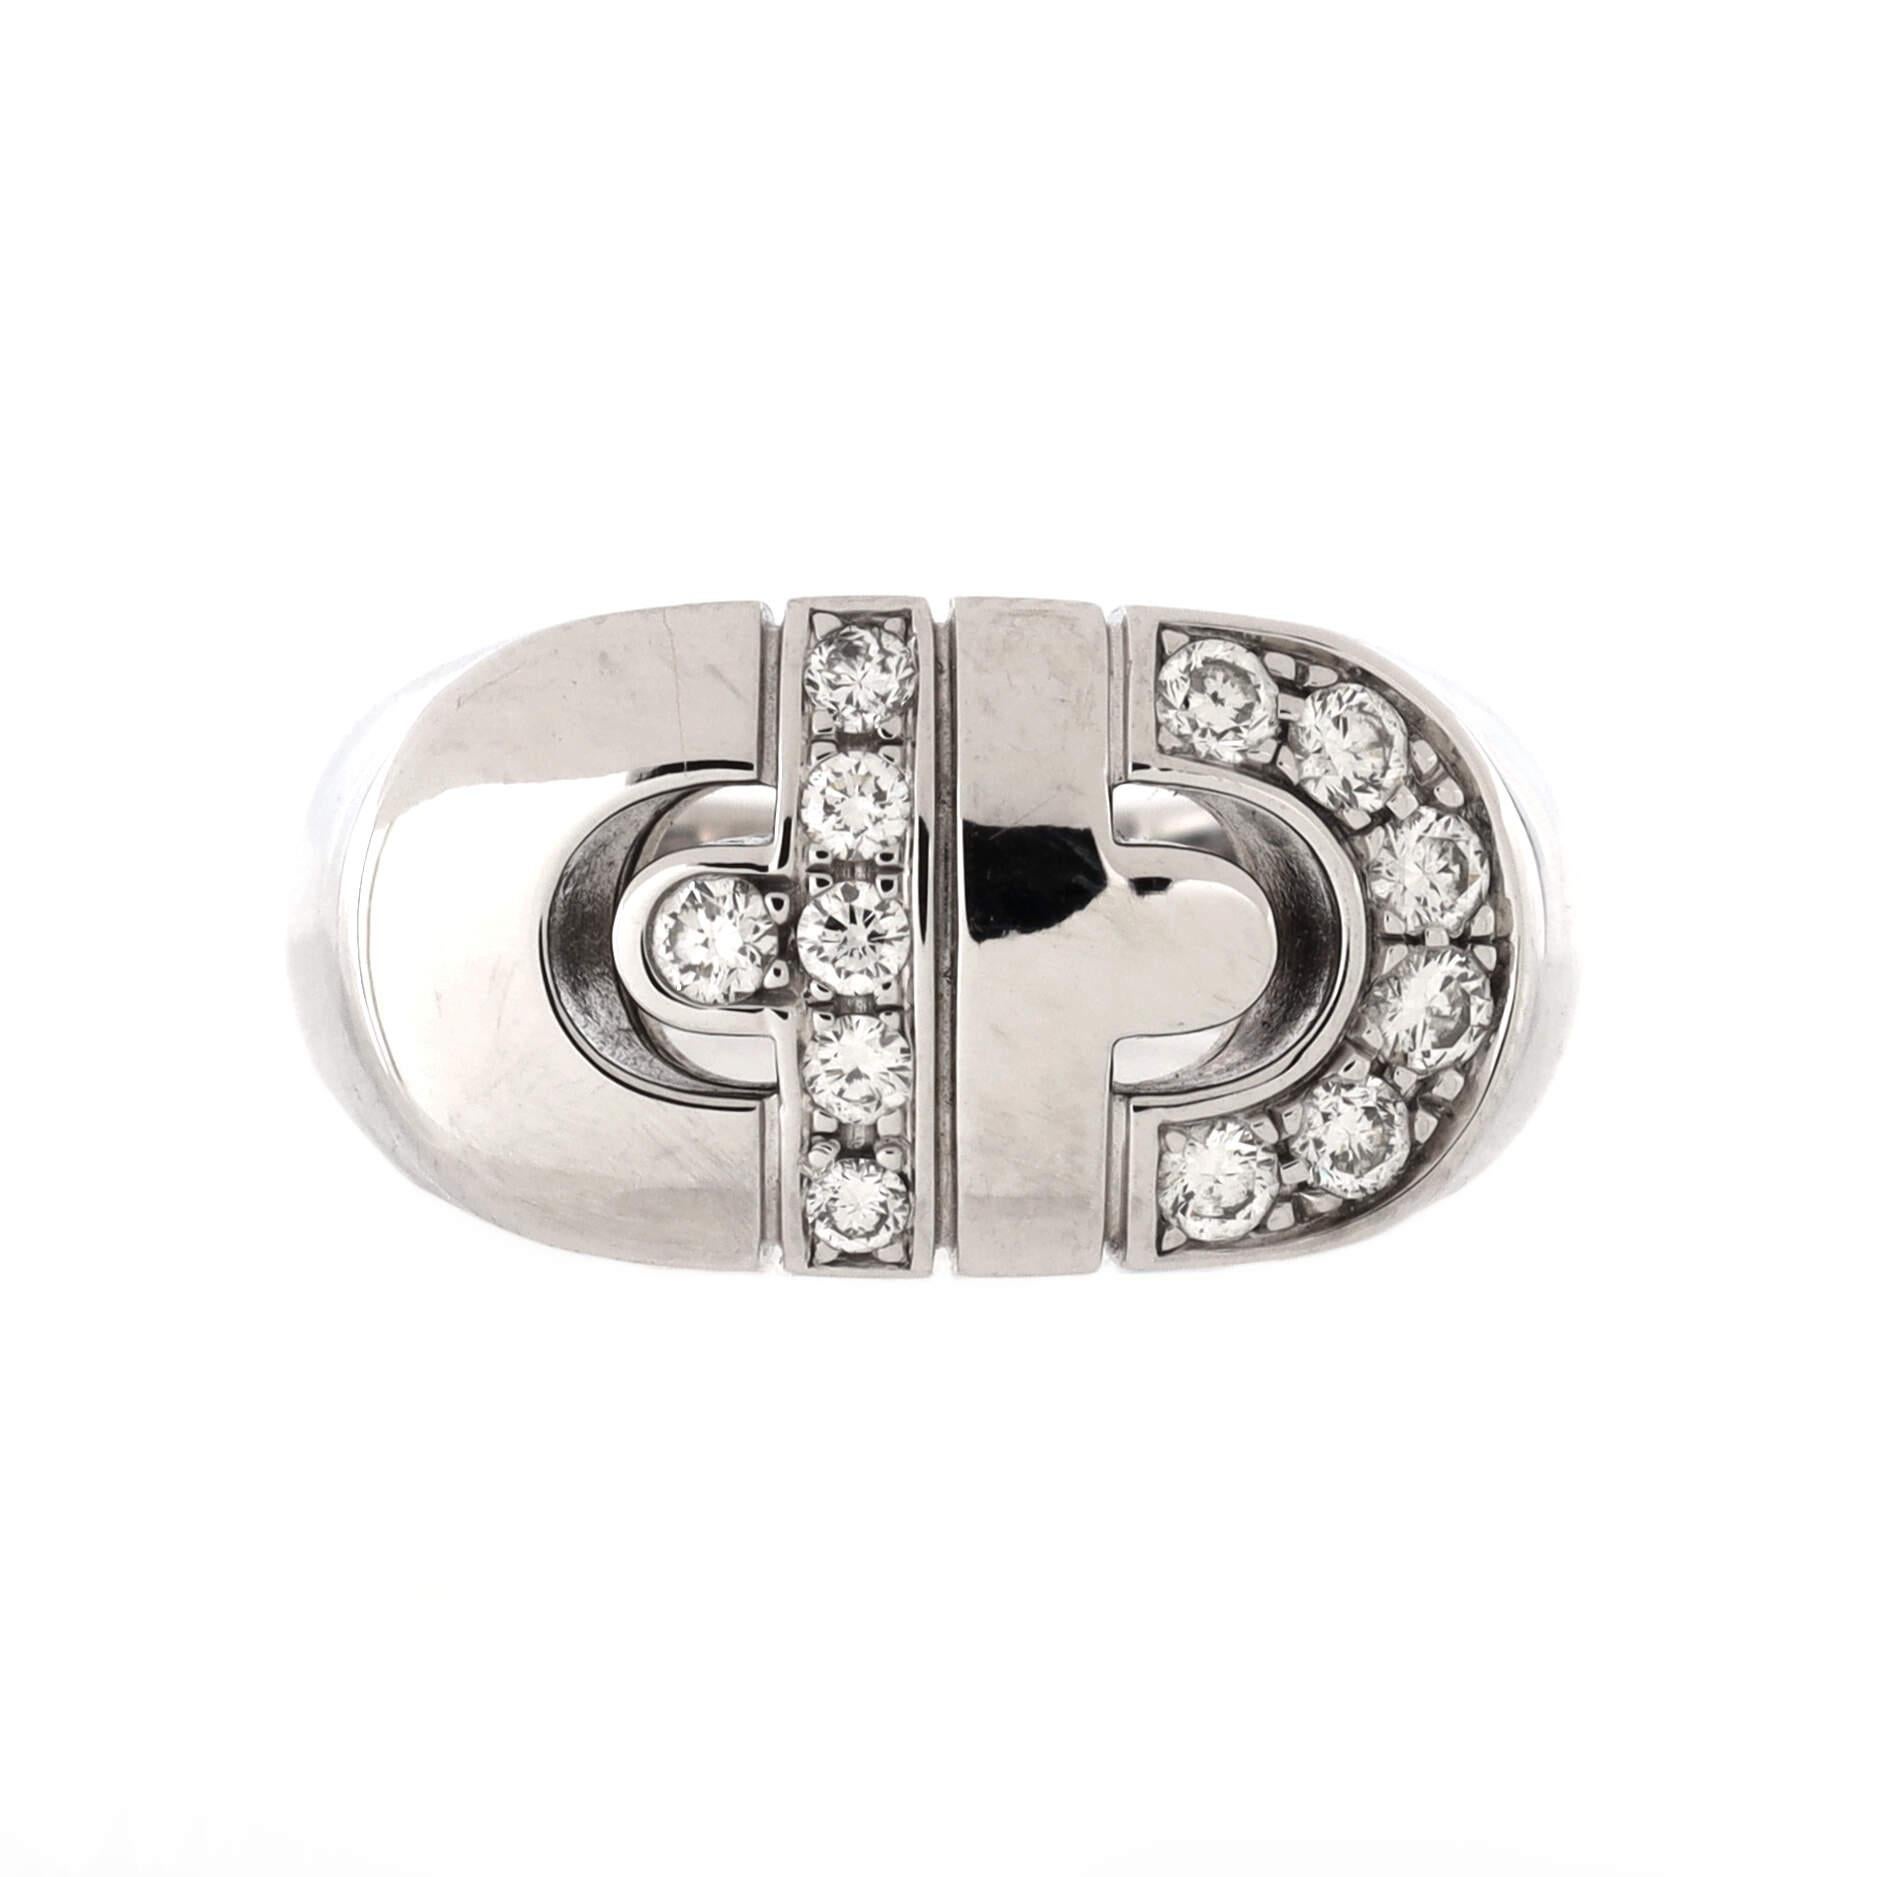 Condition: Great. Minor wear throughout.
Accessories: No Accessories
Measurements: Size: 5.75 - 51, Width: 3.75 mm
Designer: Bvlgari
Model: Parentesi Ring 18K White Gold with Diamonds
Exterior Color: White Gold
Item Number: 199862/310